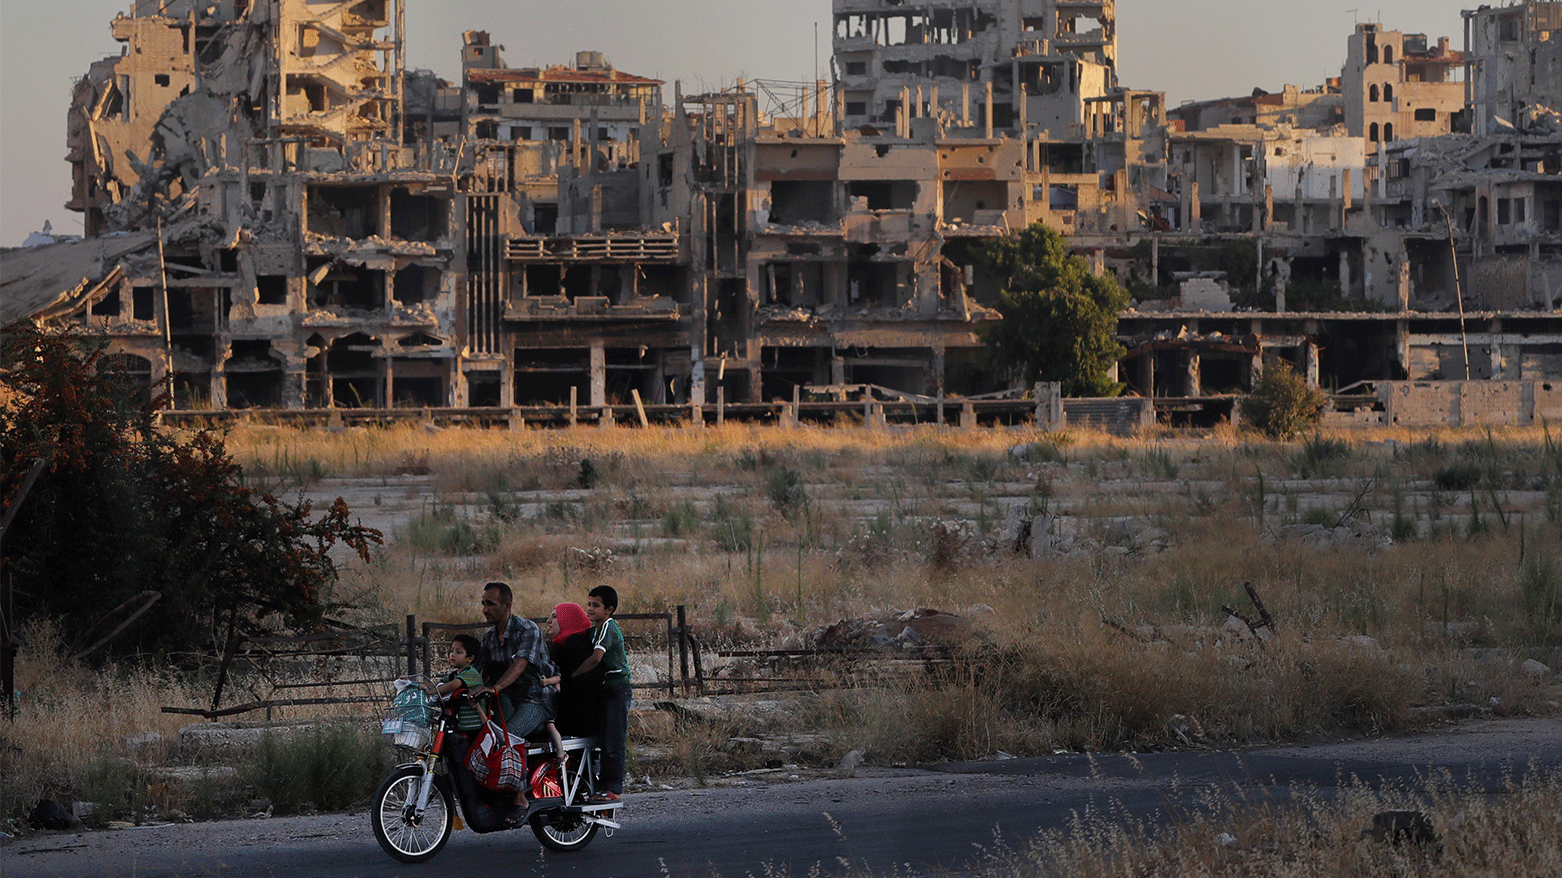 Violence in Syria is on the rise while aid is flagging as the civil war enters its th year